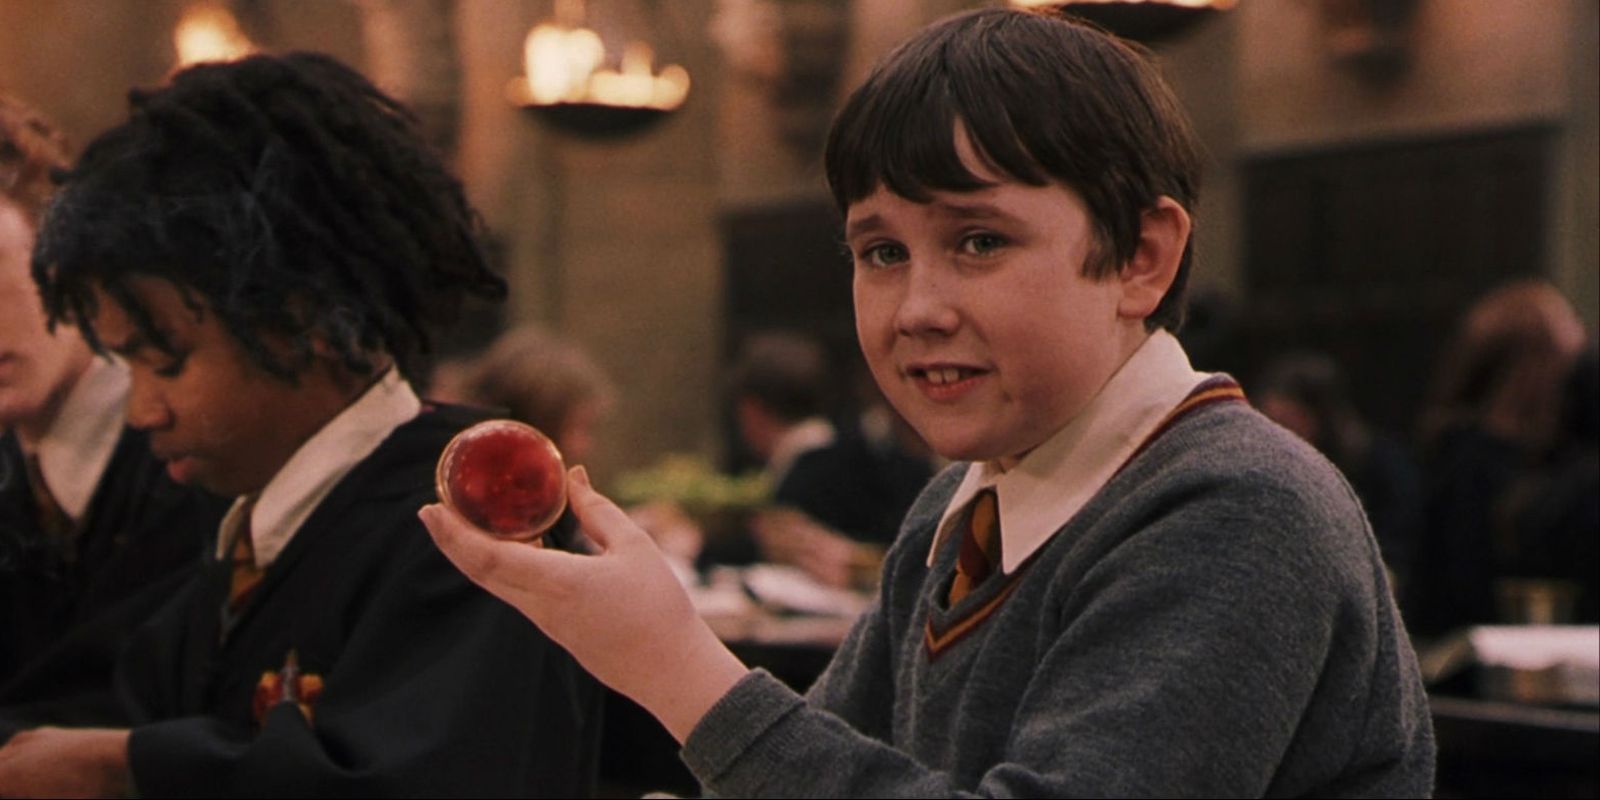 Nveille holding a rememberall in Harry Potter and the Sorcerer's Stone.